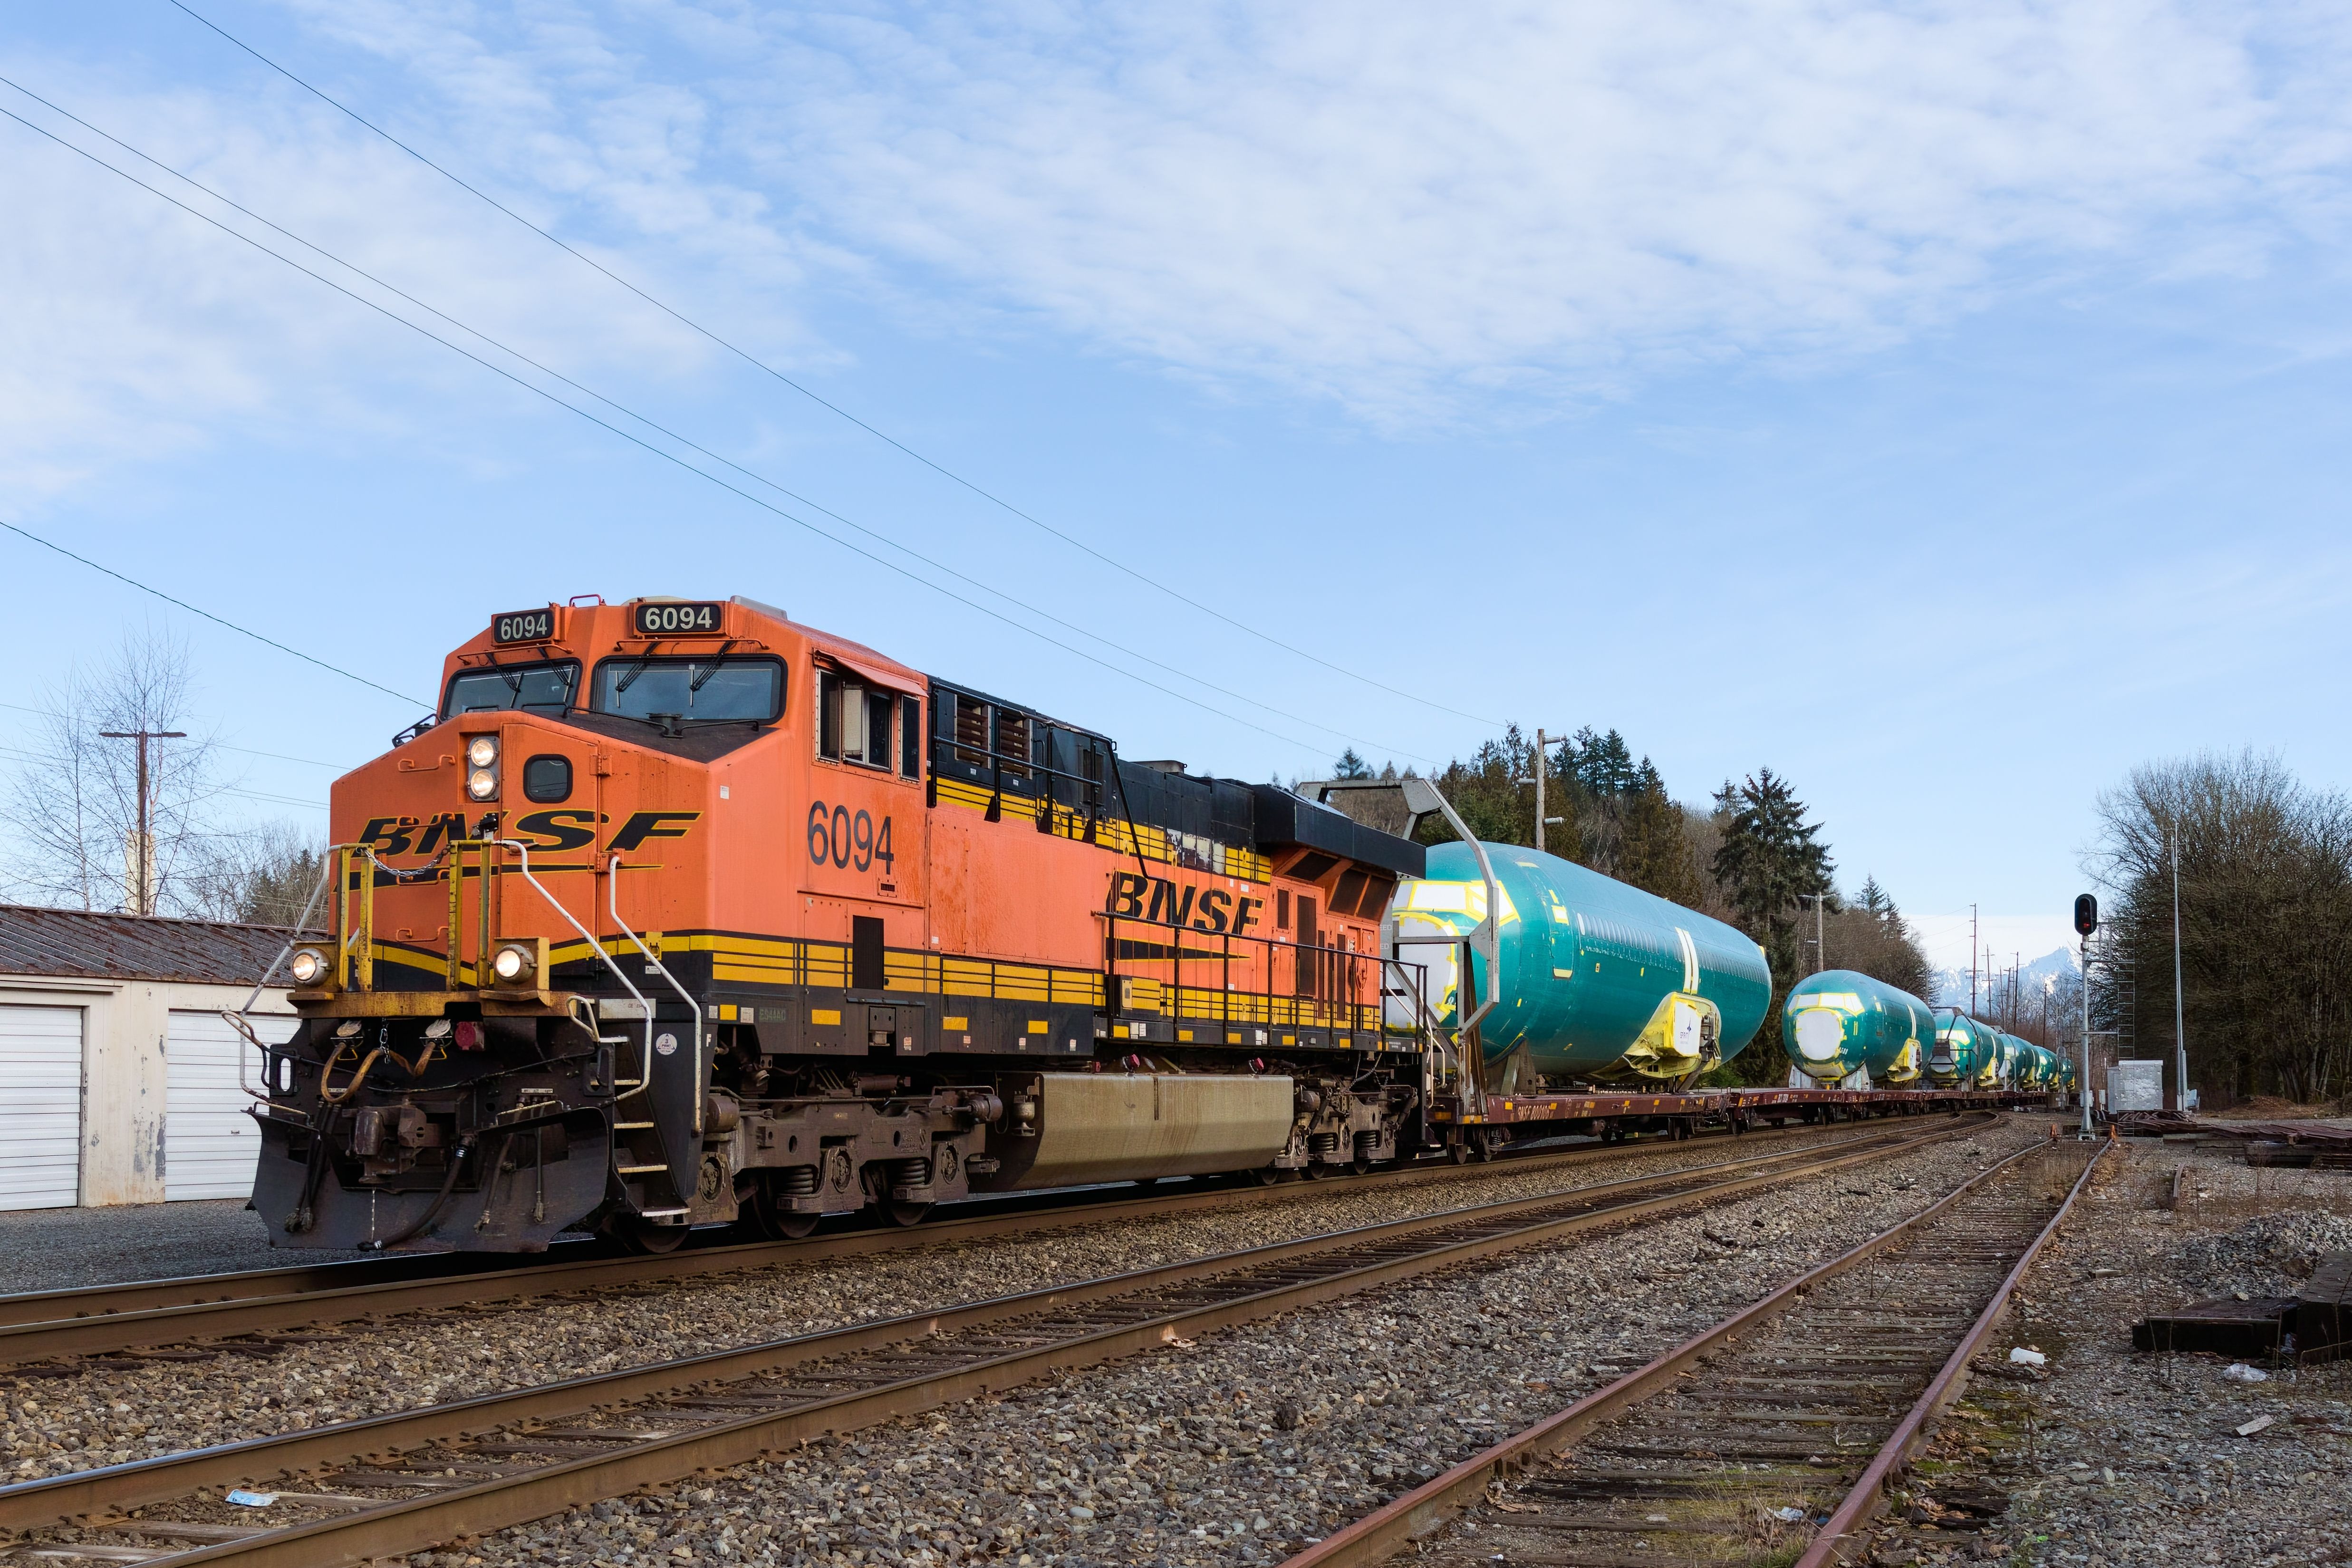 Train carrying Boeing 737 fuselages from Spirit AeroSystems to Boeing's facilities shutterstock_2257906543